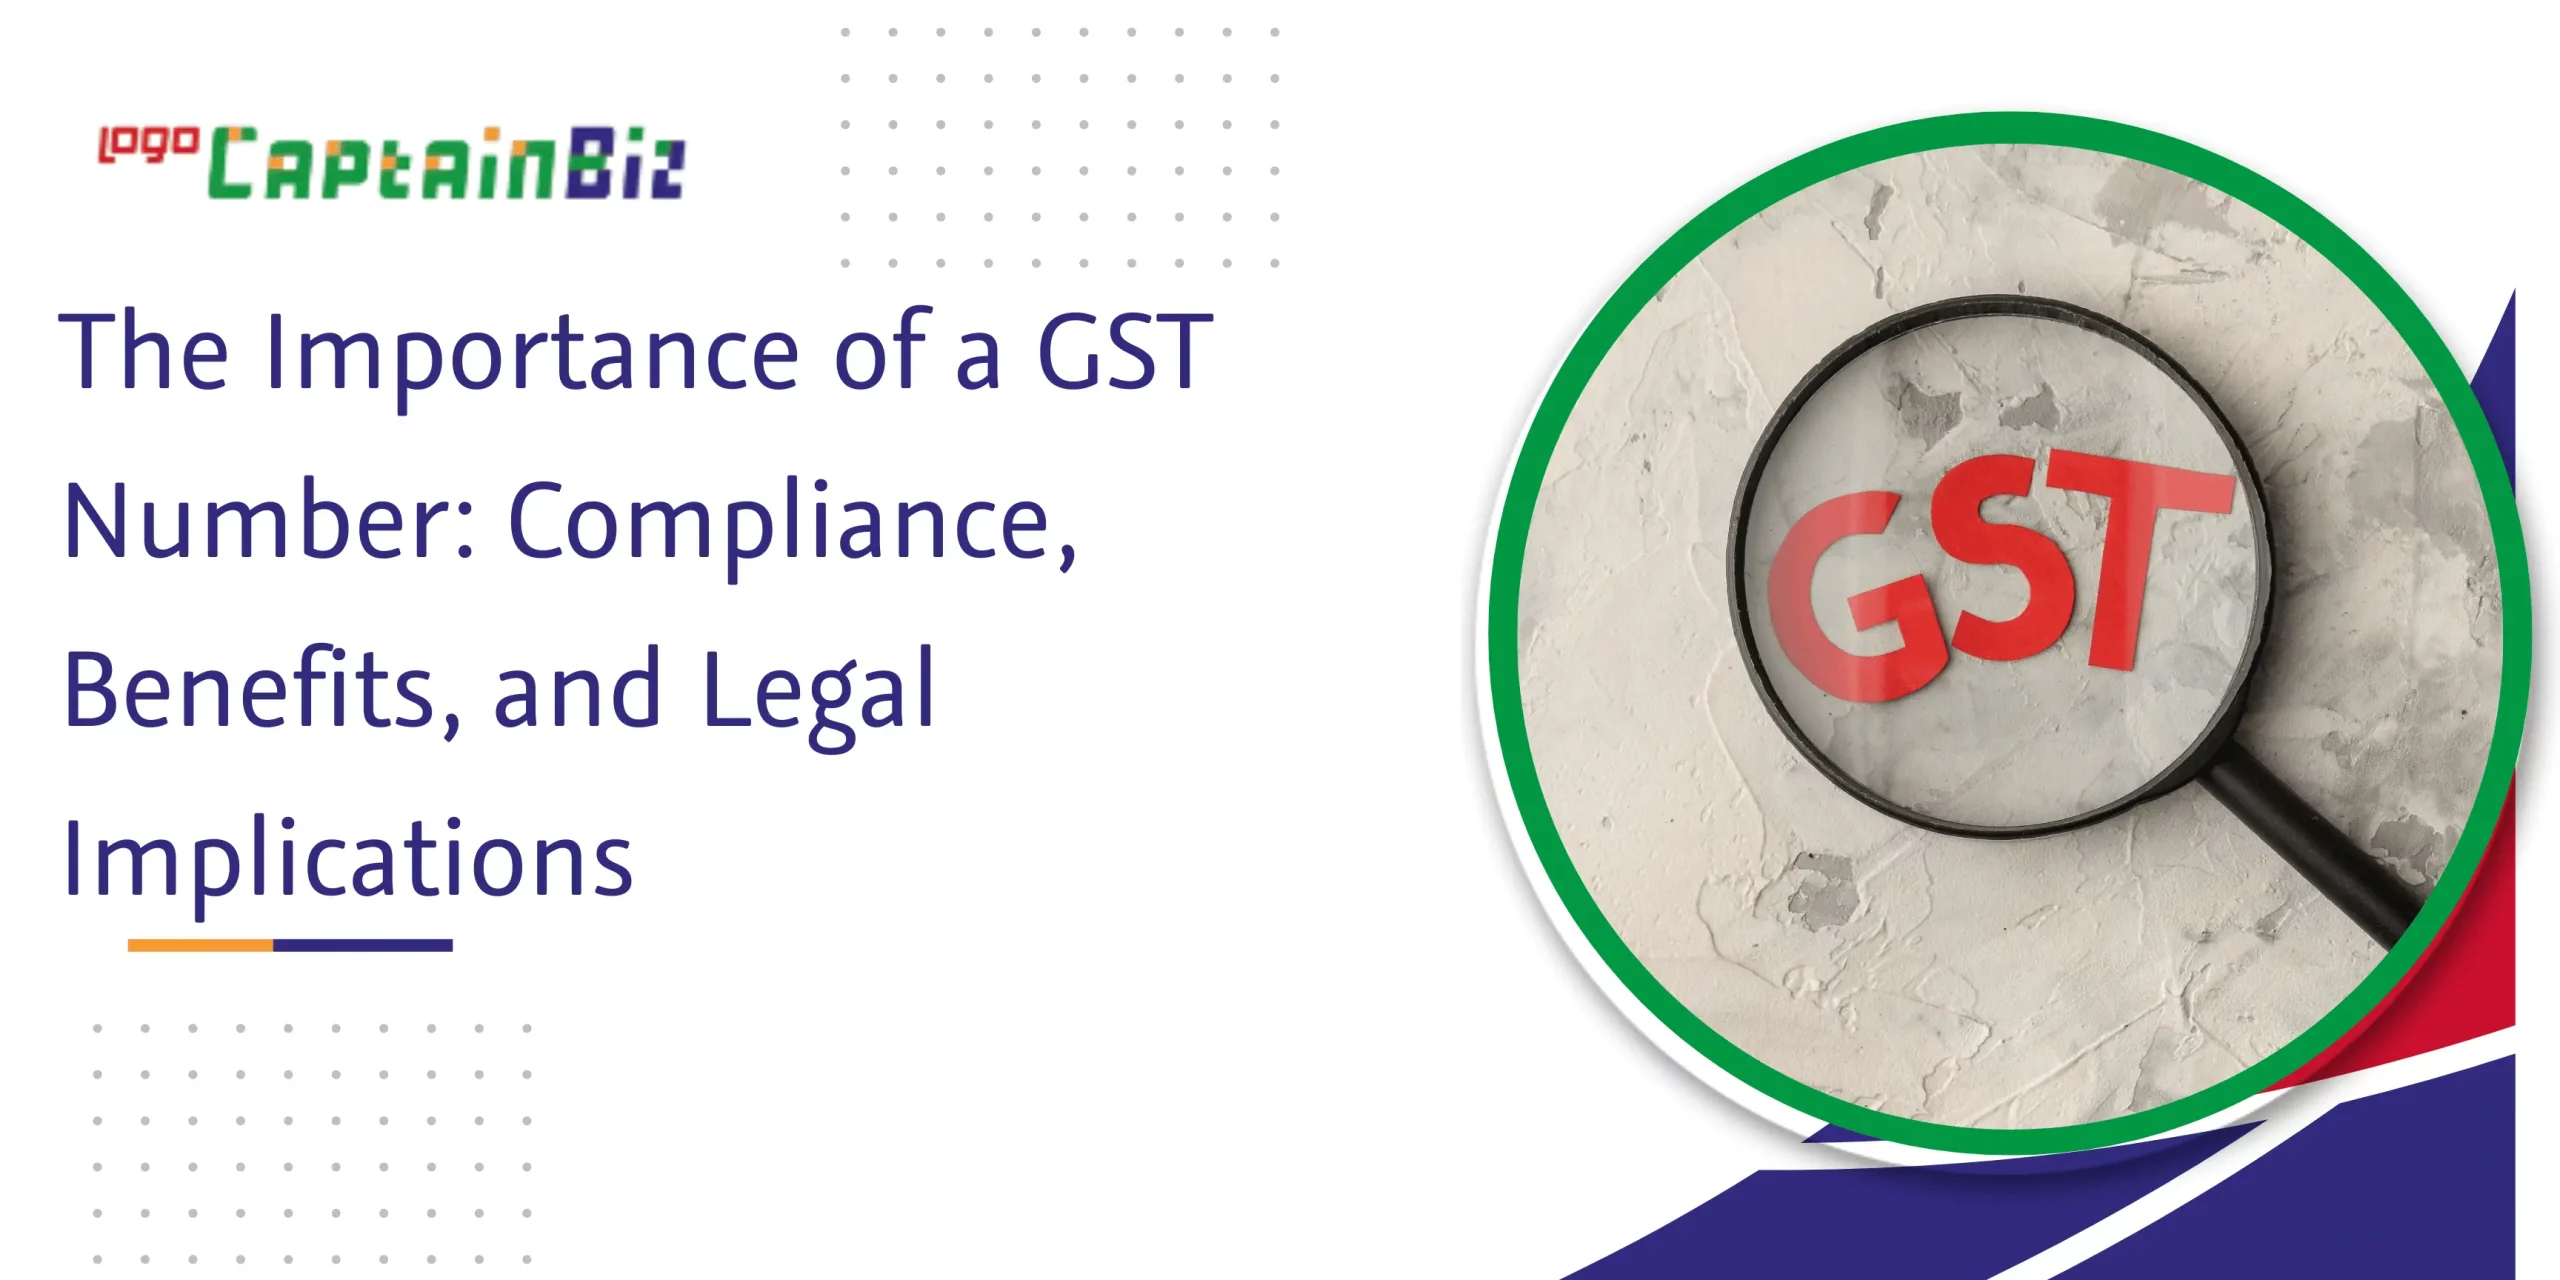 CaptainBiz: the importance of a gst number: compliance, benefits, and legal implications